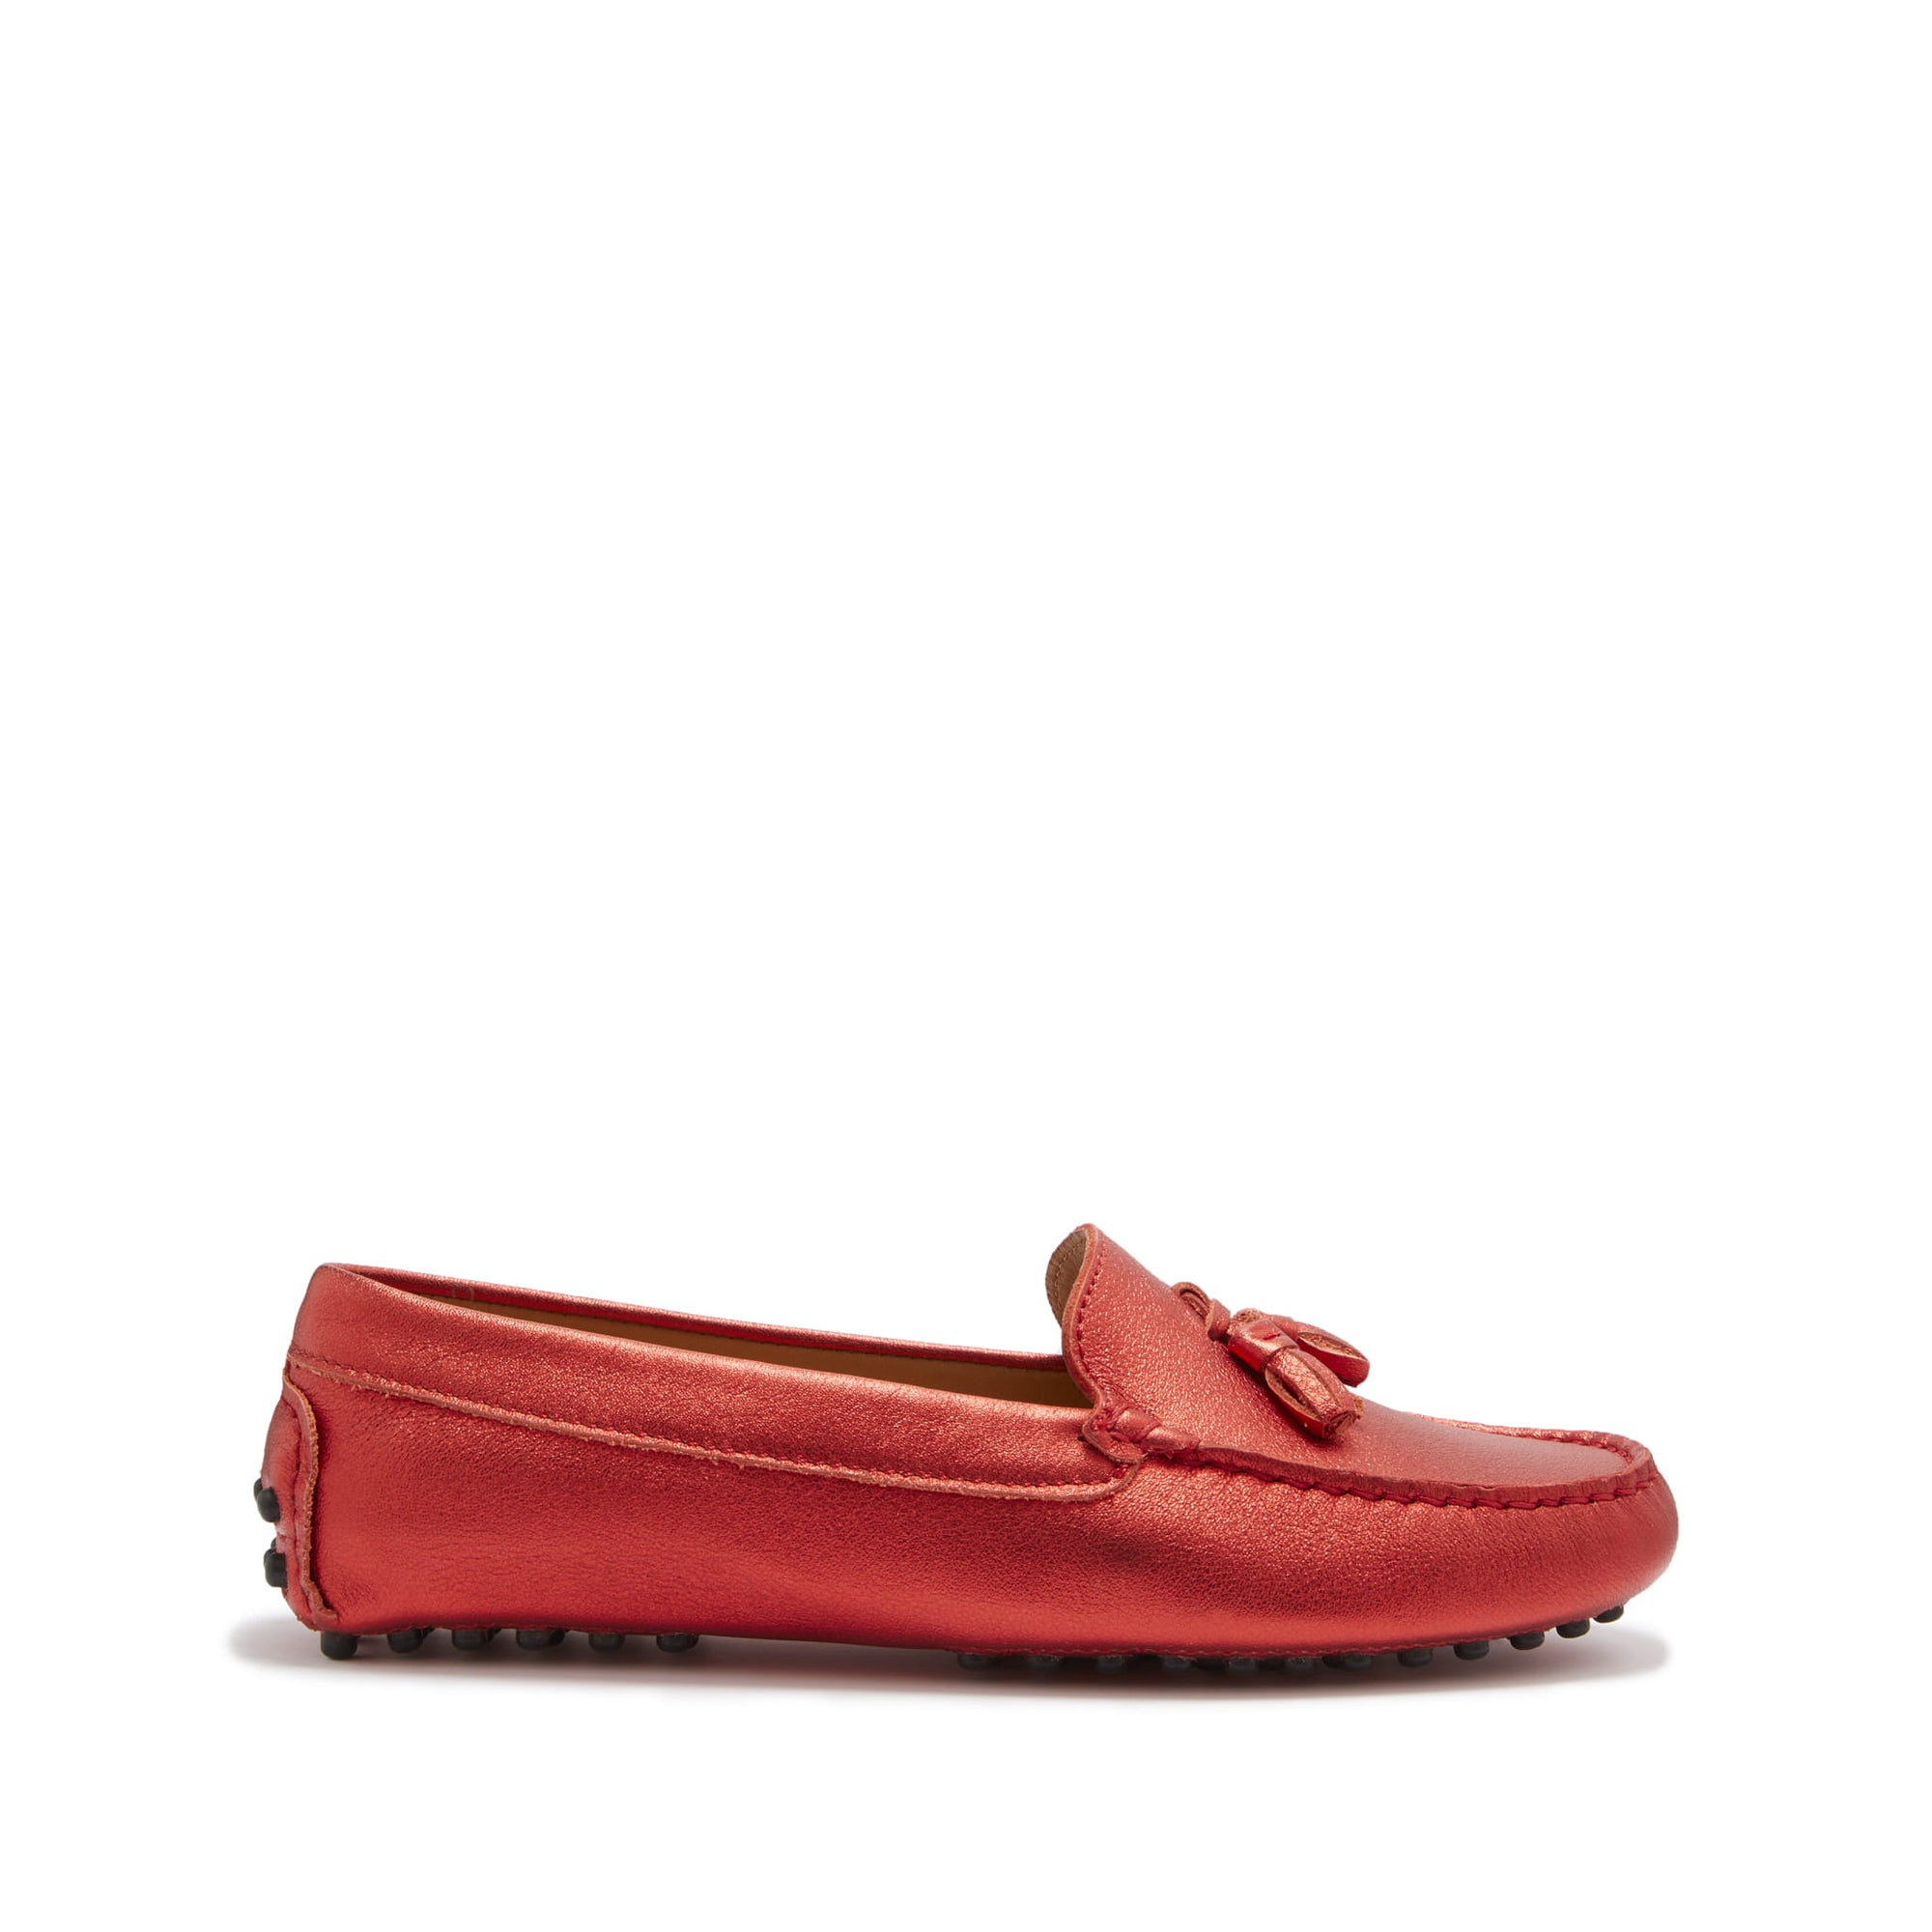 Women's Tasselled Driving Loafers, red metallic leather